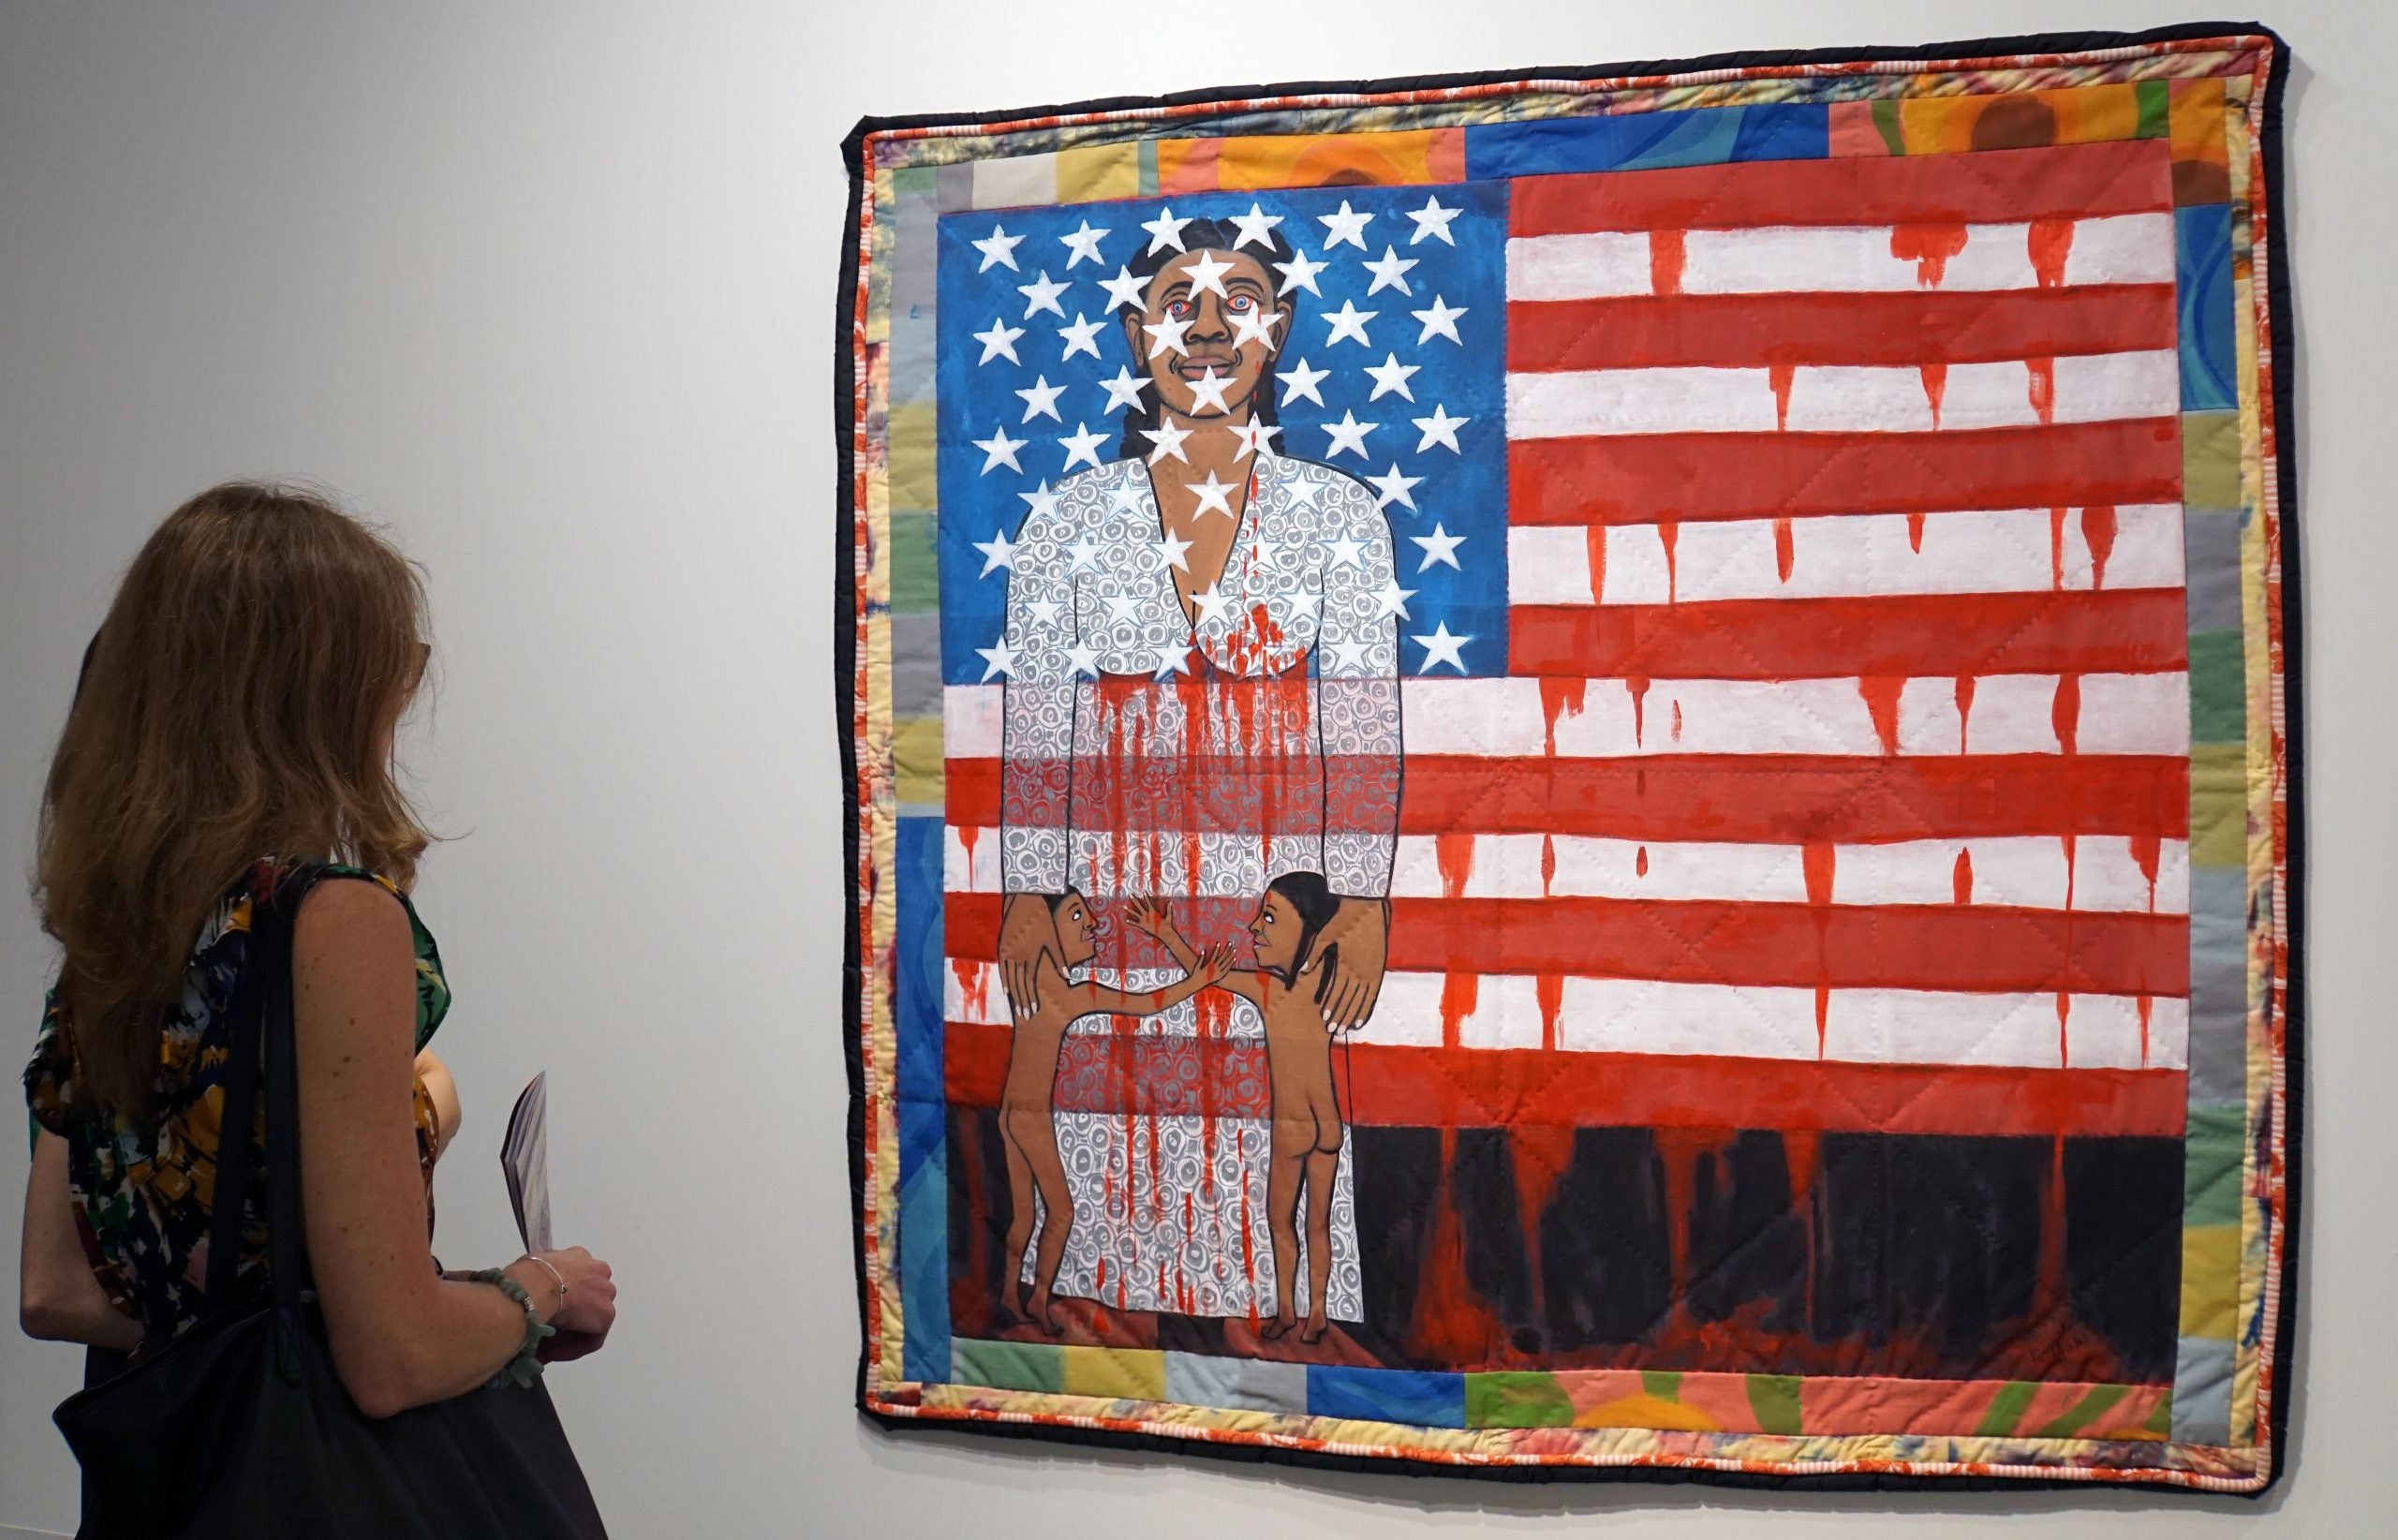 Revolutionary visual artist Faith Ringgold has died at the age of 93